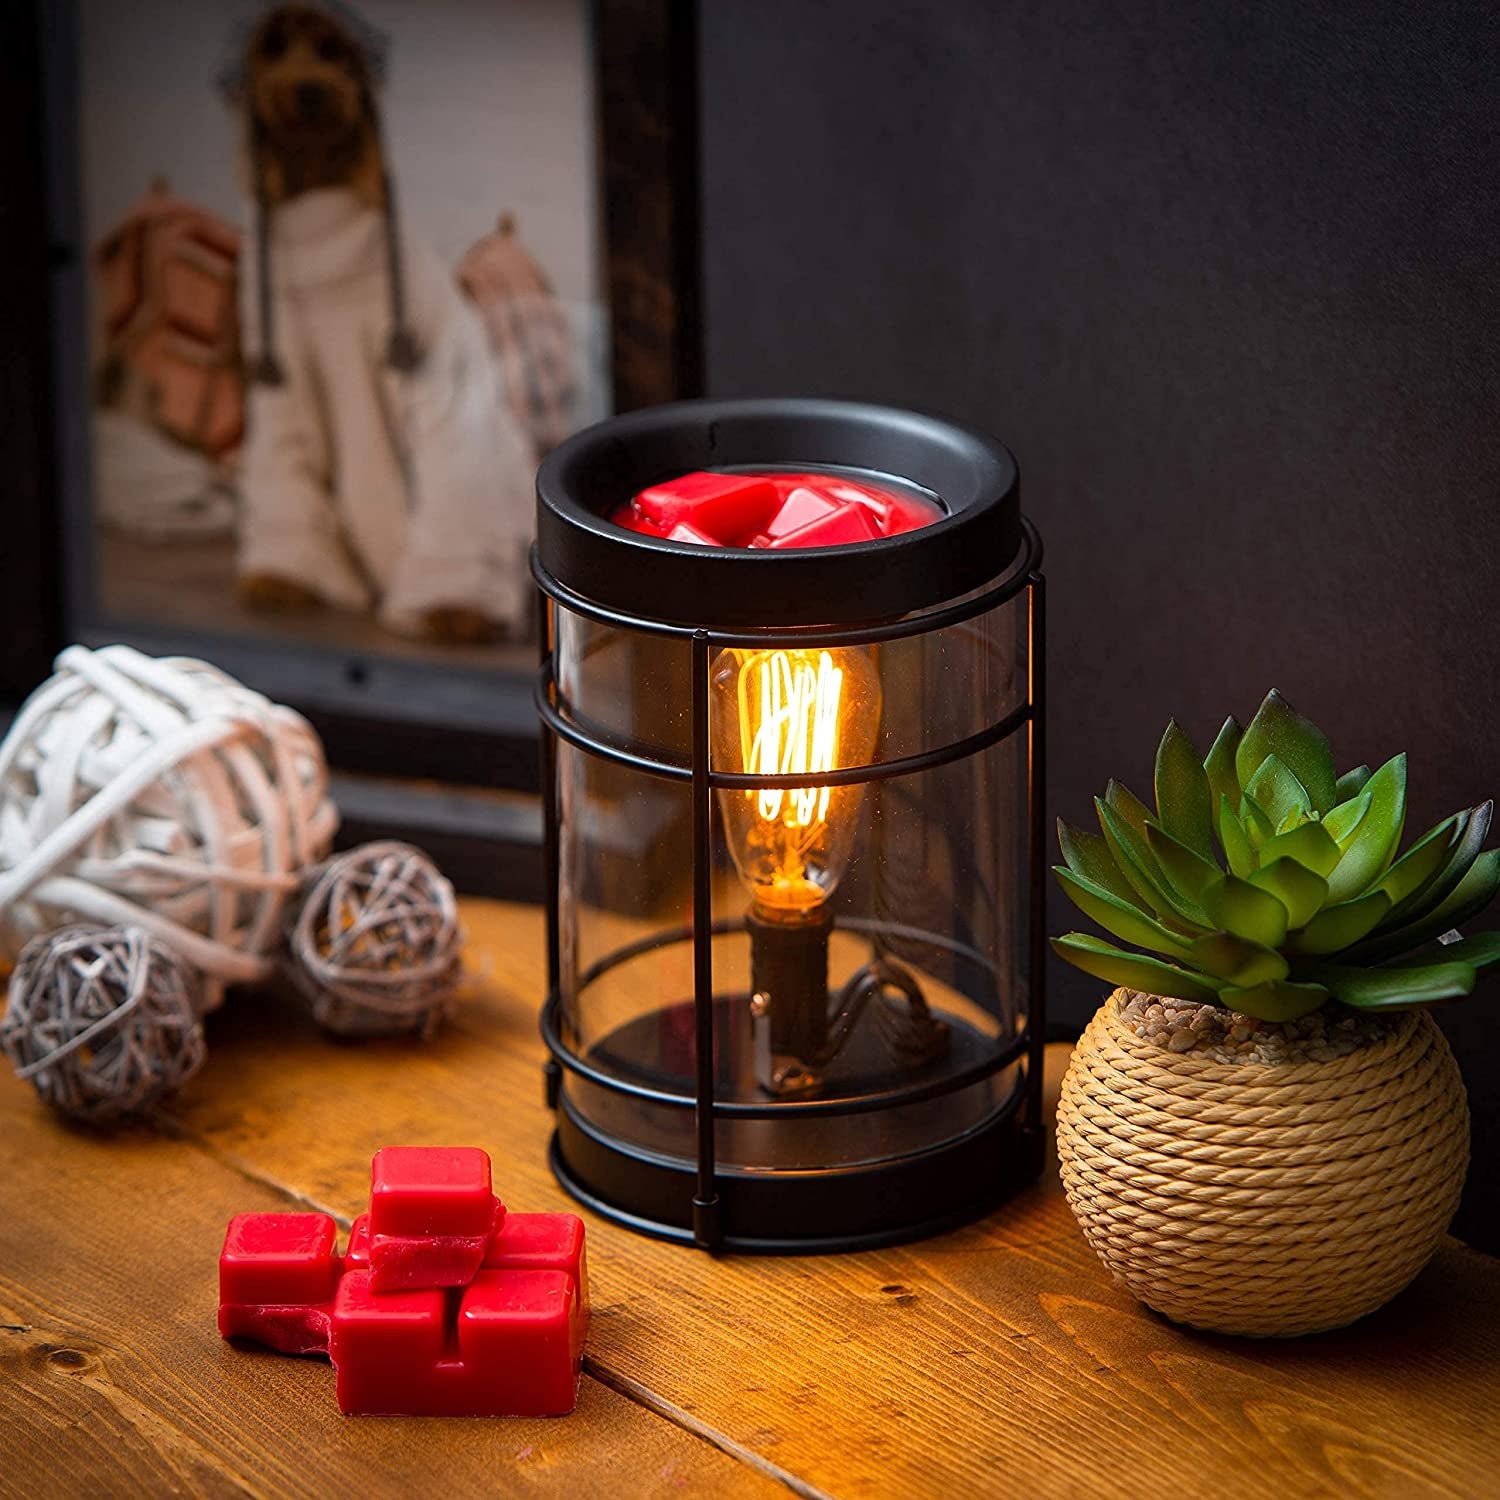 Scented Wax Melts, Cubes, TartsHome Harmony EssentialsHome Harmony EssentialsKitchen & Bar Essentials
FLAMELESS ALTERNATIVE TO CANDLES – Electric wax warmers are a safer and cleaner alternative to burning traditional candles. Simply warm your own scented wax melts iVintage Bulb Electric Candle Warmer with Timer | Black Plug in Fragran